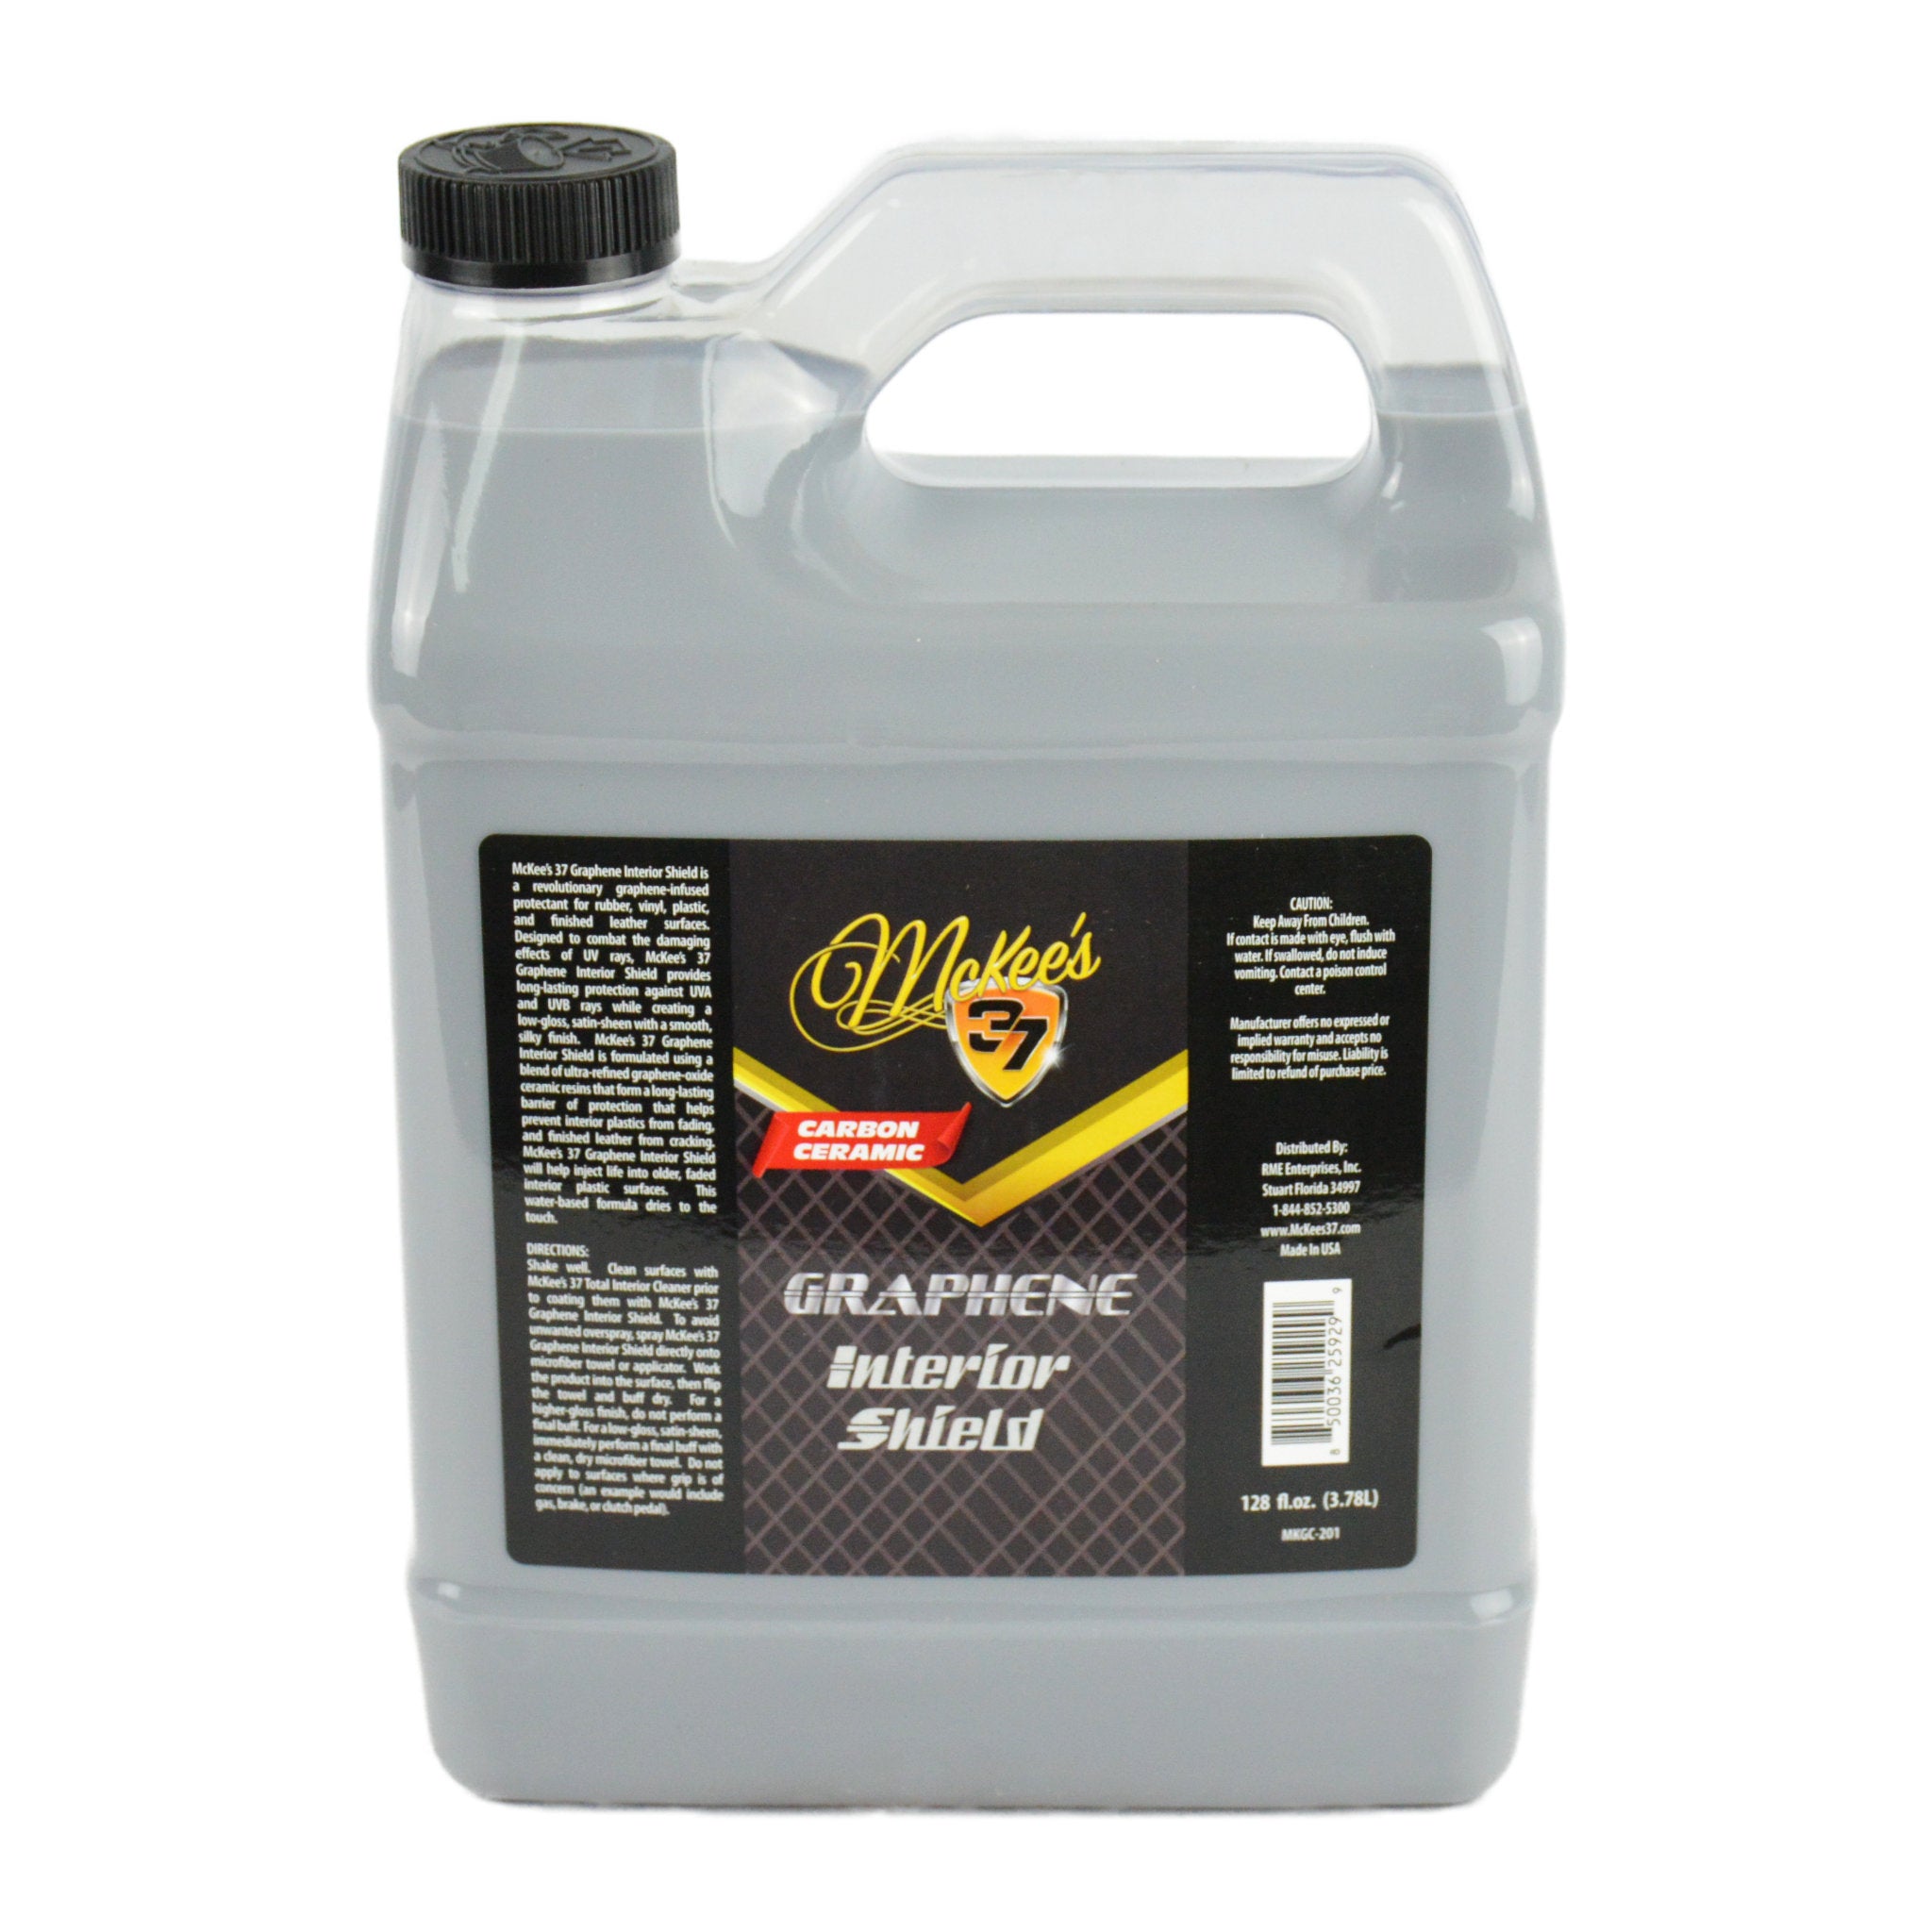 McKee's 37 Interior Surface Protectant 22 oz.